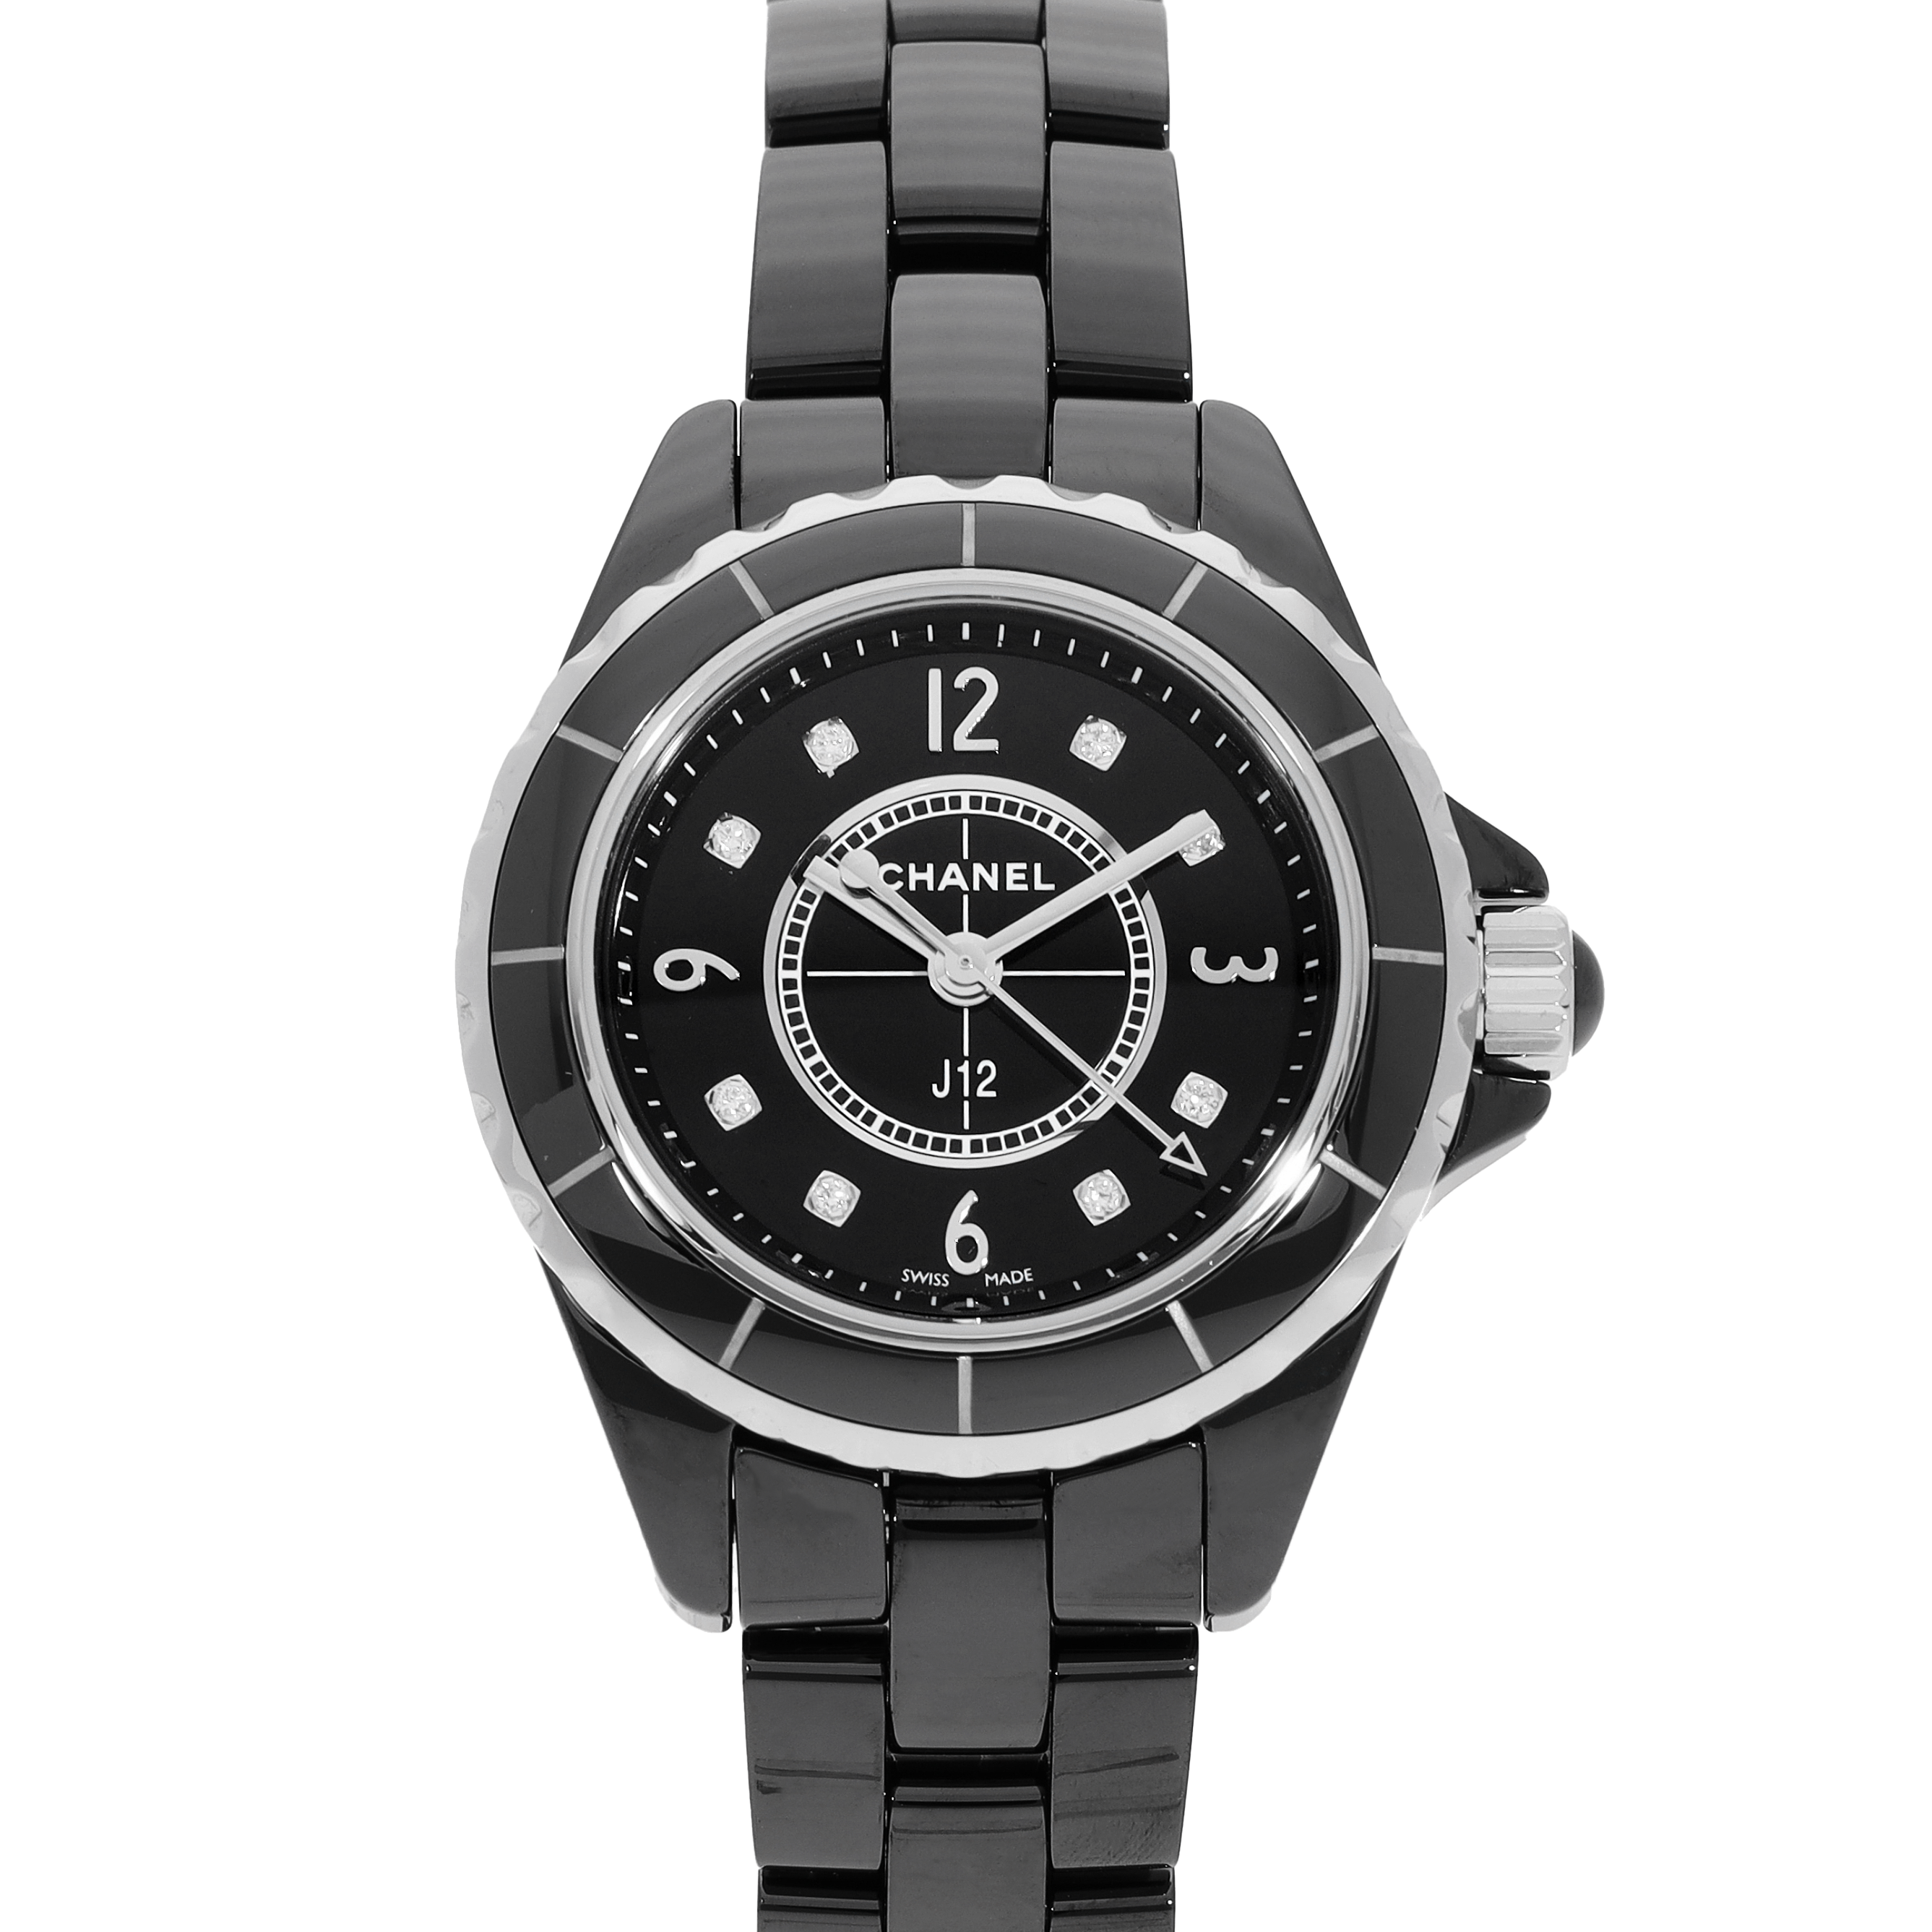 Chanel 149 watches with prices  The Watch Pages